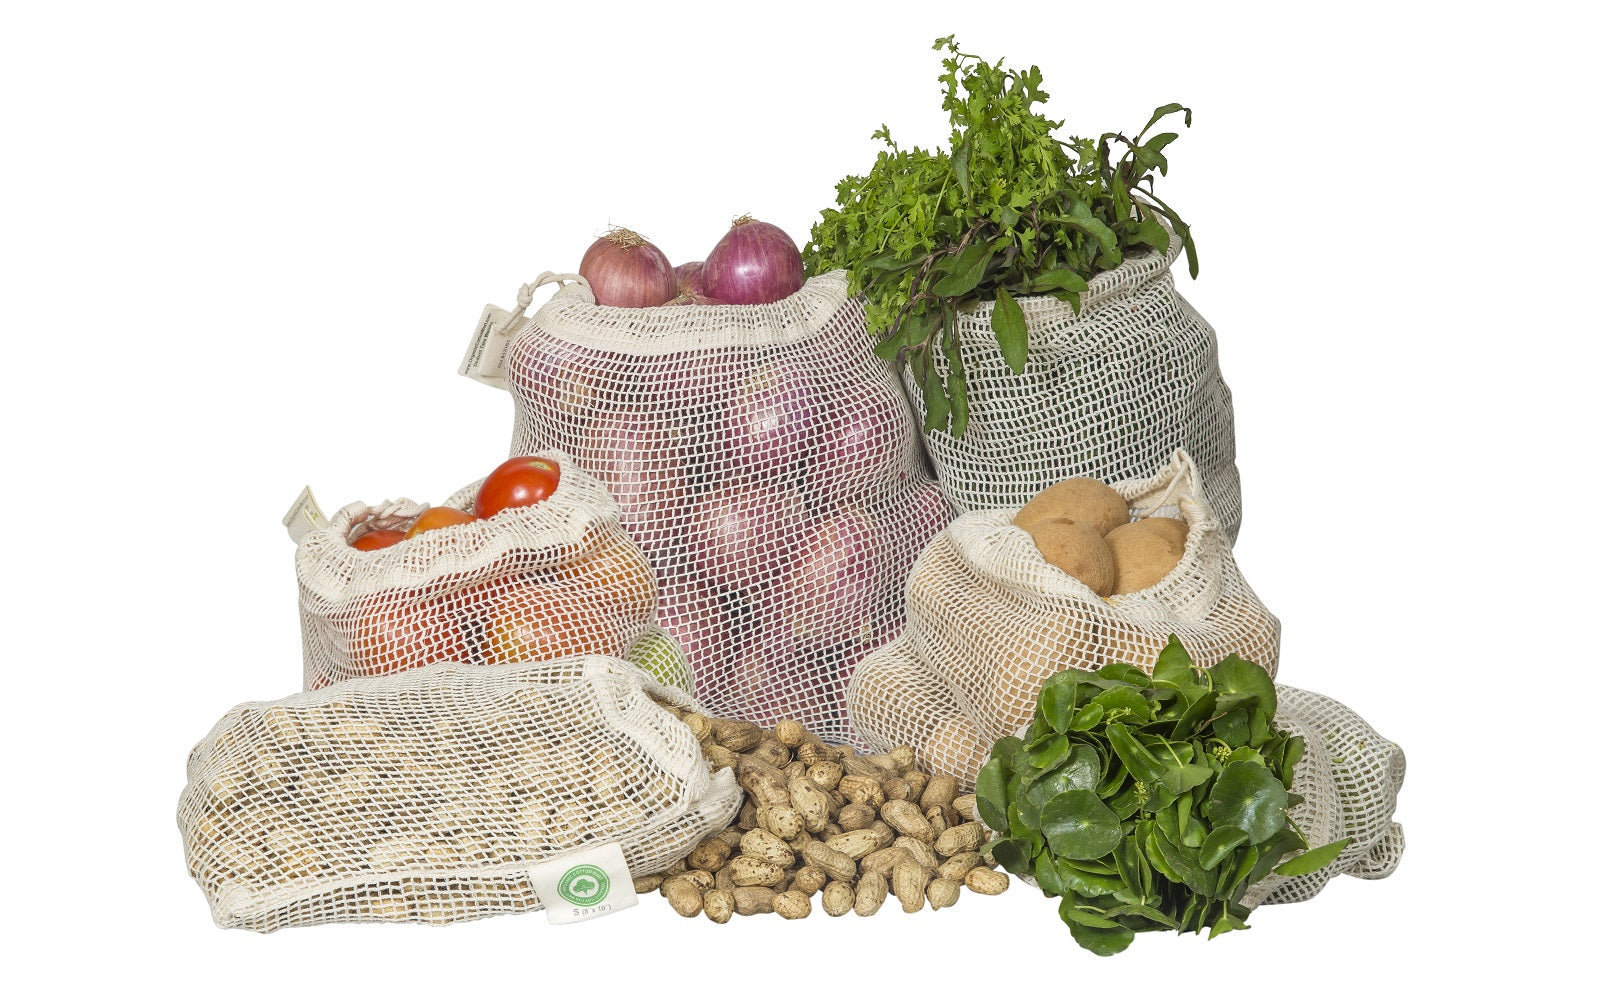 Cotton Mesh Produce Bags  Reusable Net Bags for Produce and